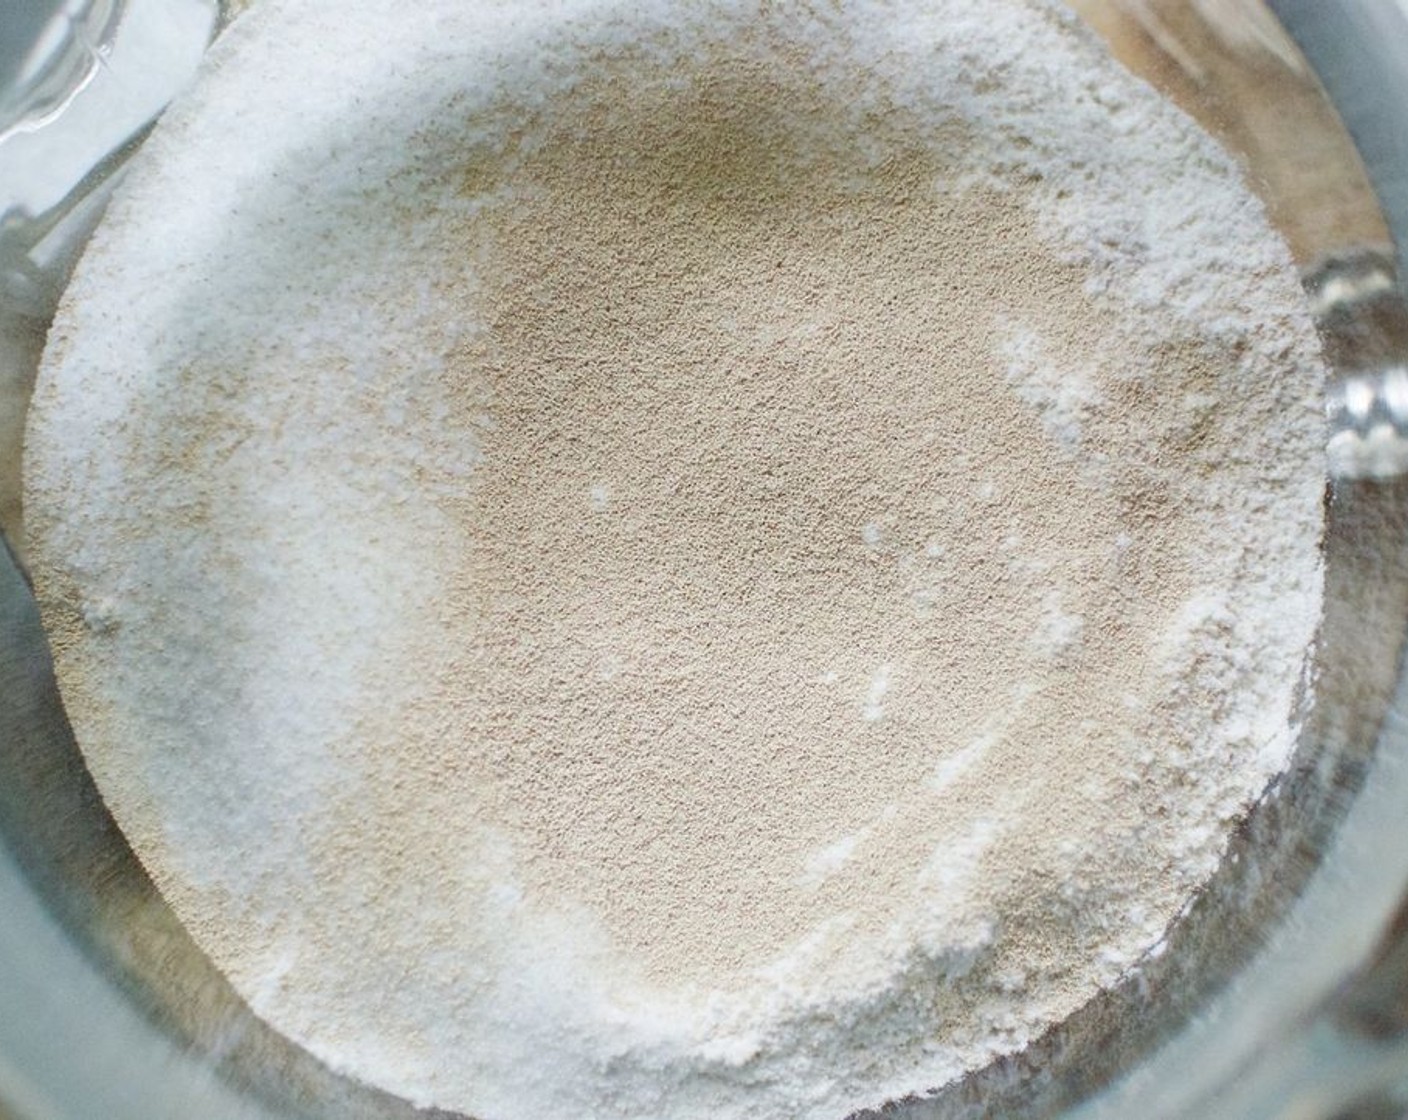 step 3 In a 5 to 6-quart bowl or stand mixer, whisk together 6 cups of the Gluten-Free Flour Mixture you just made, Instant Dry Yeast (1 Tbsp), Kosher Salt (1 1/2 Tbsp), and Granulated Sugar (2 Tbsp).